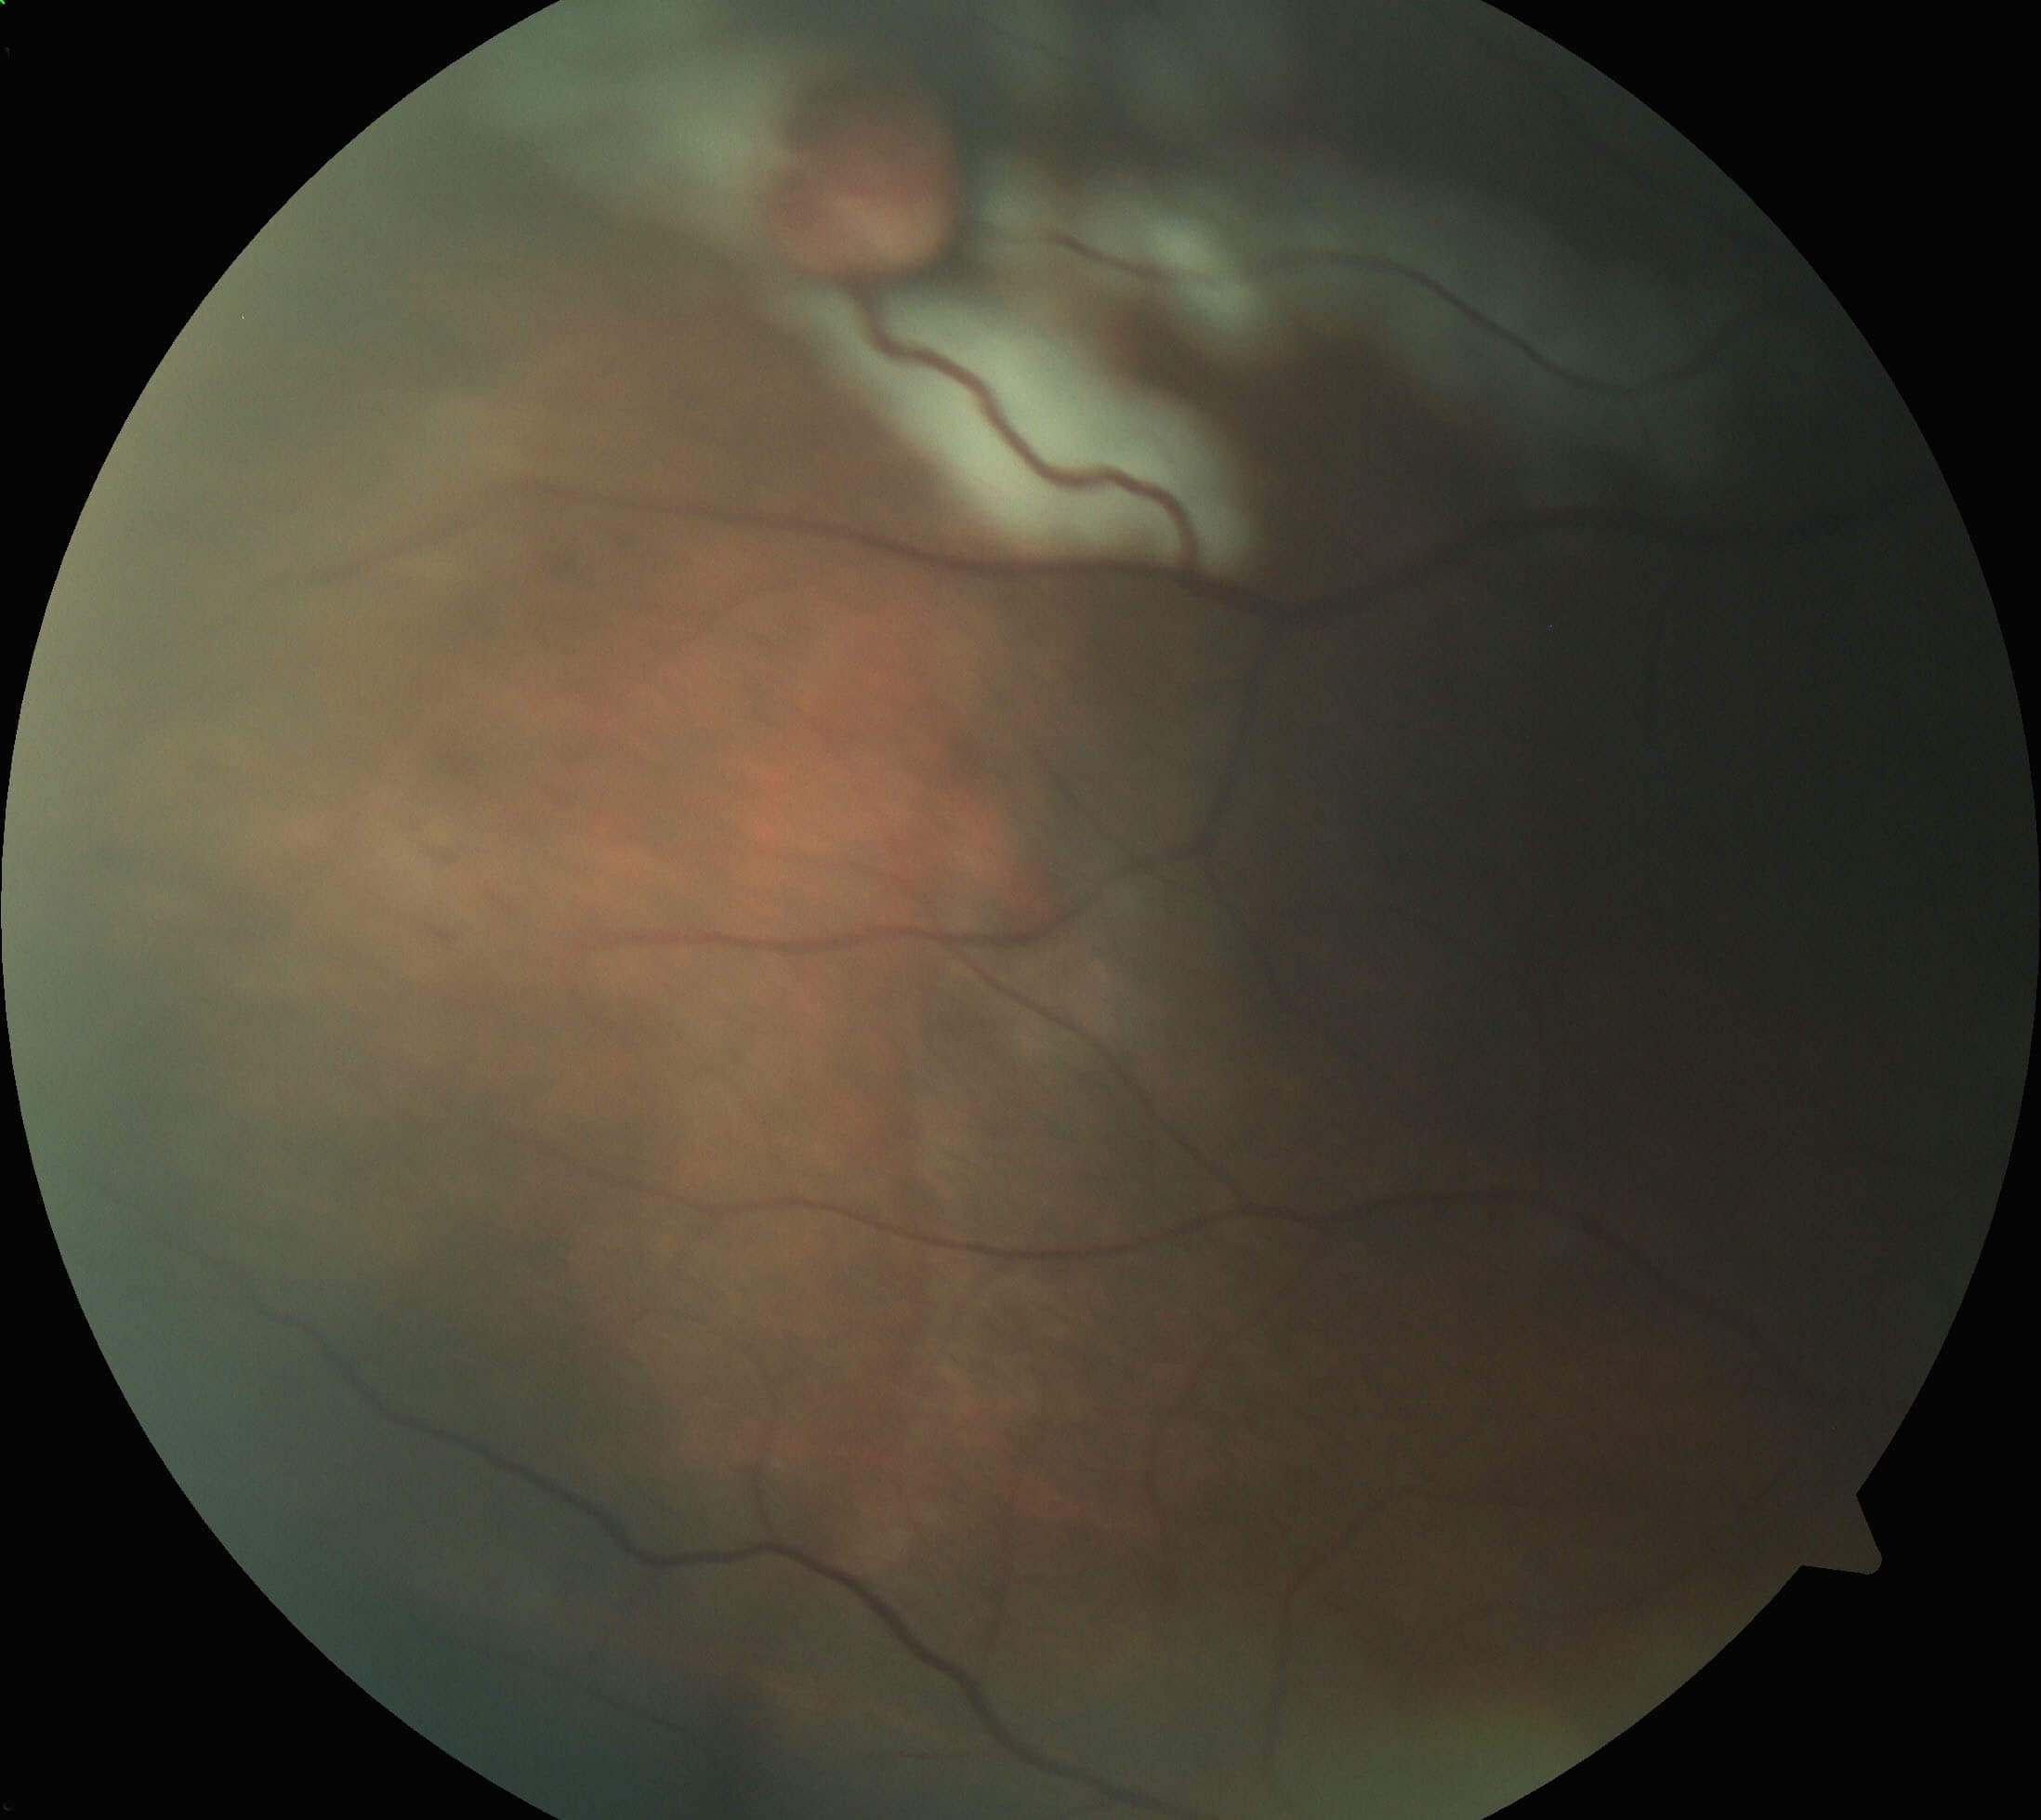 Colour fundus photograph immediately following argon laser photocoagulation. The laser marks are seen in white.